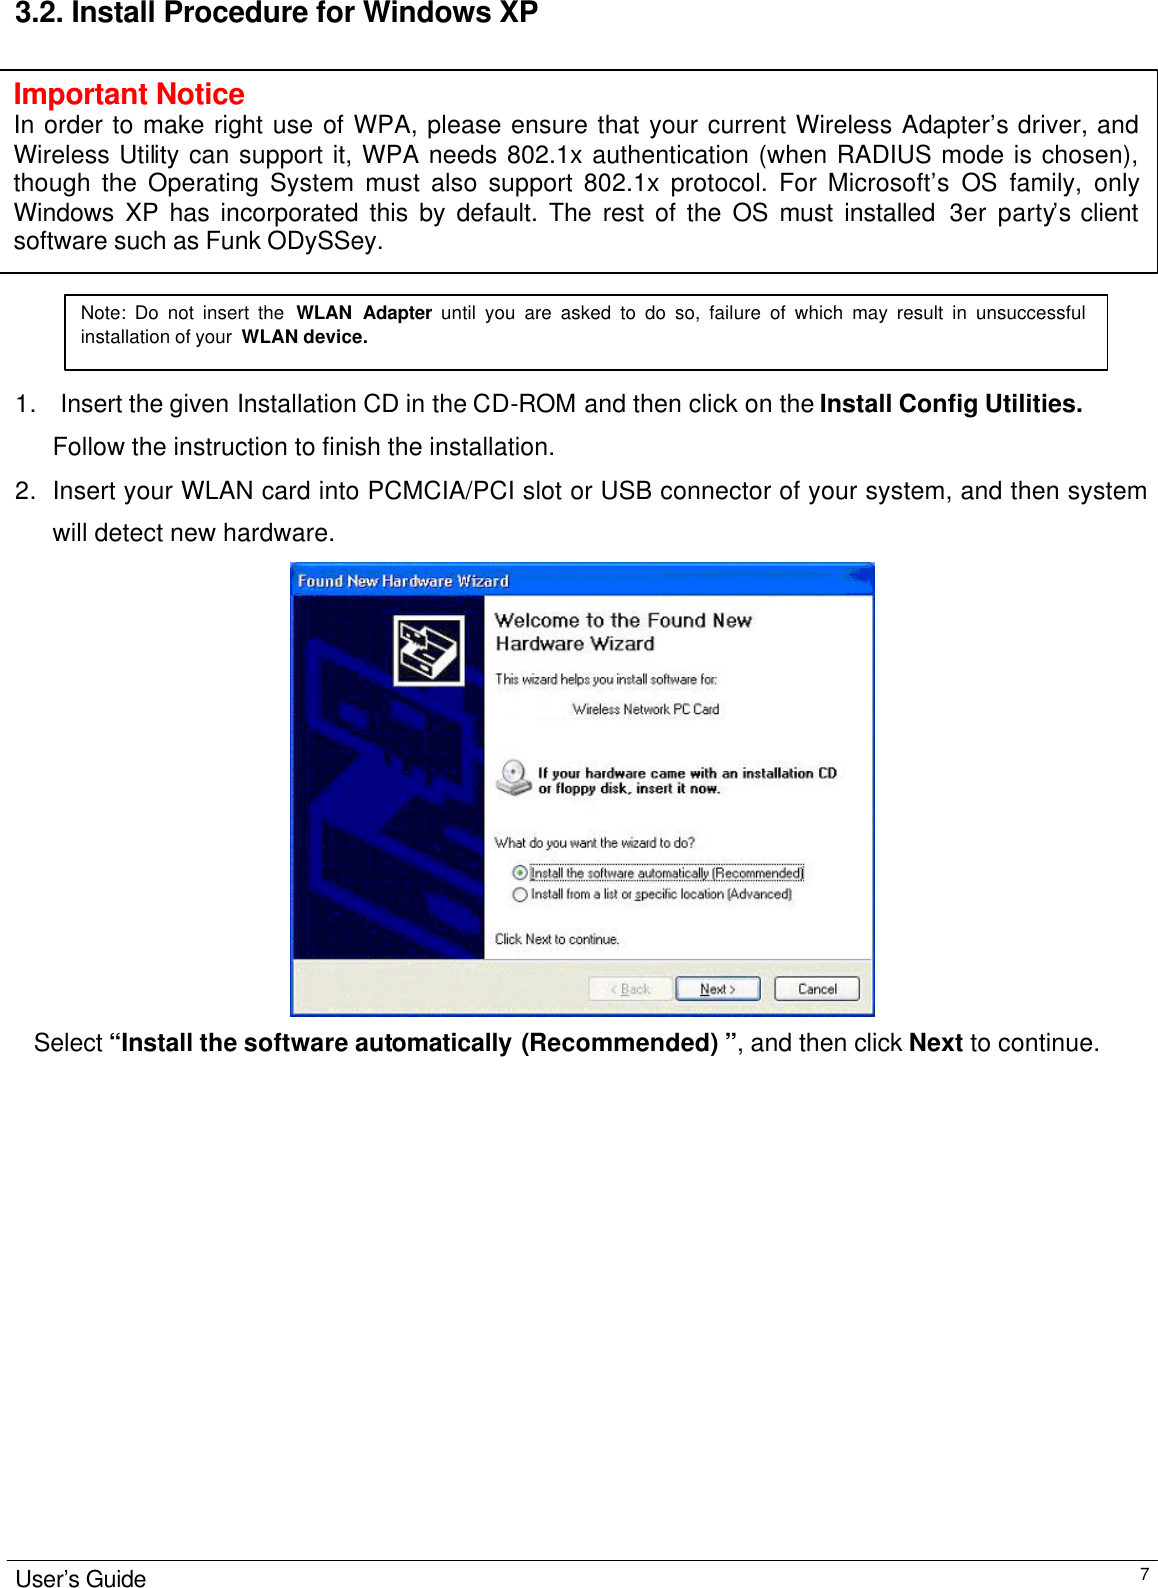                                                                                                                                                                                                                                                                                    User’s Guide  7 3.2. Install Procedure for Windows XP              1.   Insert the given Installation CD in the CD-ROM and then click on the Install Config Utilities. Follow the instruction to finish the installation.  2. Insert your WLAN card into PCMCIA/PCI slot or USB connector of your system, and then system will detect new hardware.     Select “Install the software automatically (Recommended) ”, and then click Next to continue.                          Note: Do not insert the WLAN Adapter until you are asked to do so, failure of which may result in unsuccessful installation of your  WLAN device. Important Notice In order to make right use of WPA, please ensure that your current Wireless Adapter’s driver, and Wireless Utility can support it, WPA needs 802.1x authentication (when RADIUS mode is chosen), though the Operating System must also support 802.1x protocol. For Microsoft’s OS family, only Windows XP has incorporated this by default. The rest of the OS must installed 3er party’s client software such as Funk ODySSey.  